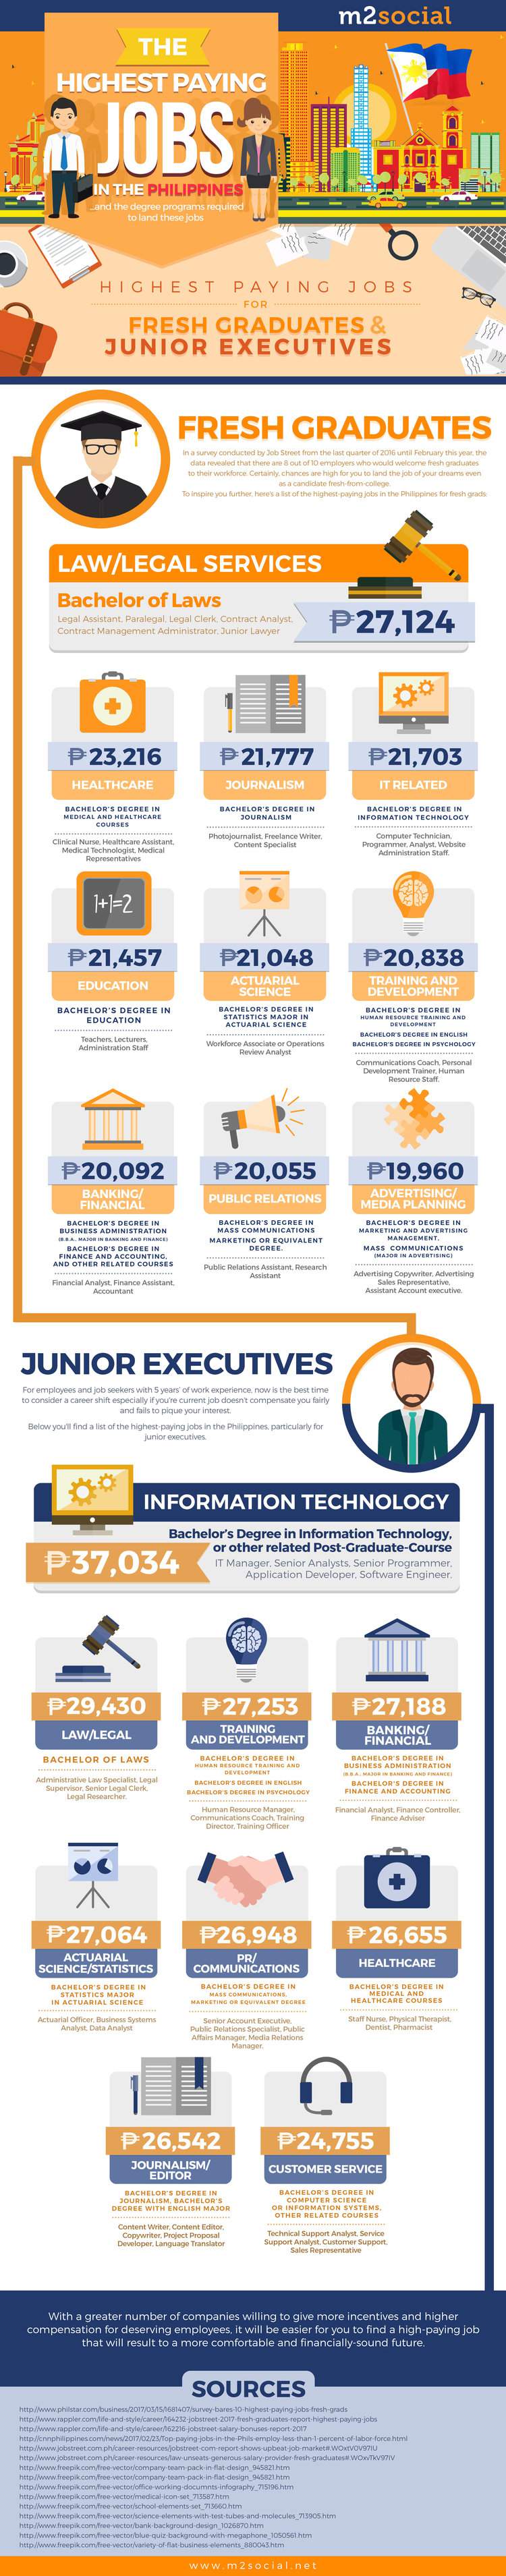 Highest Paying Jobs in the Philippines